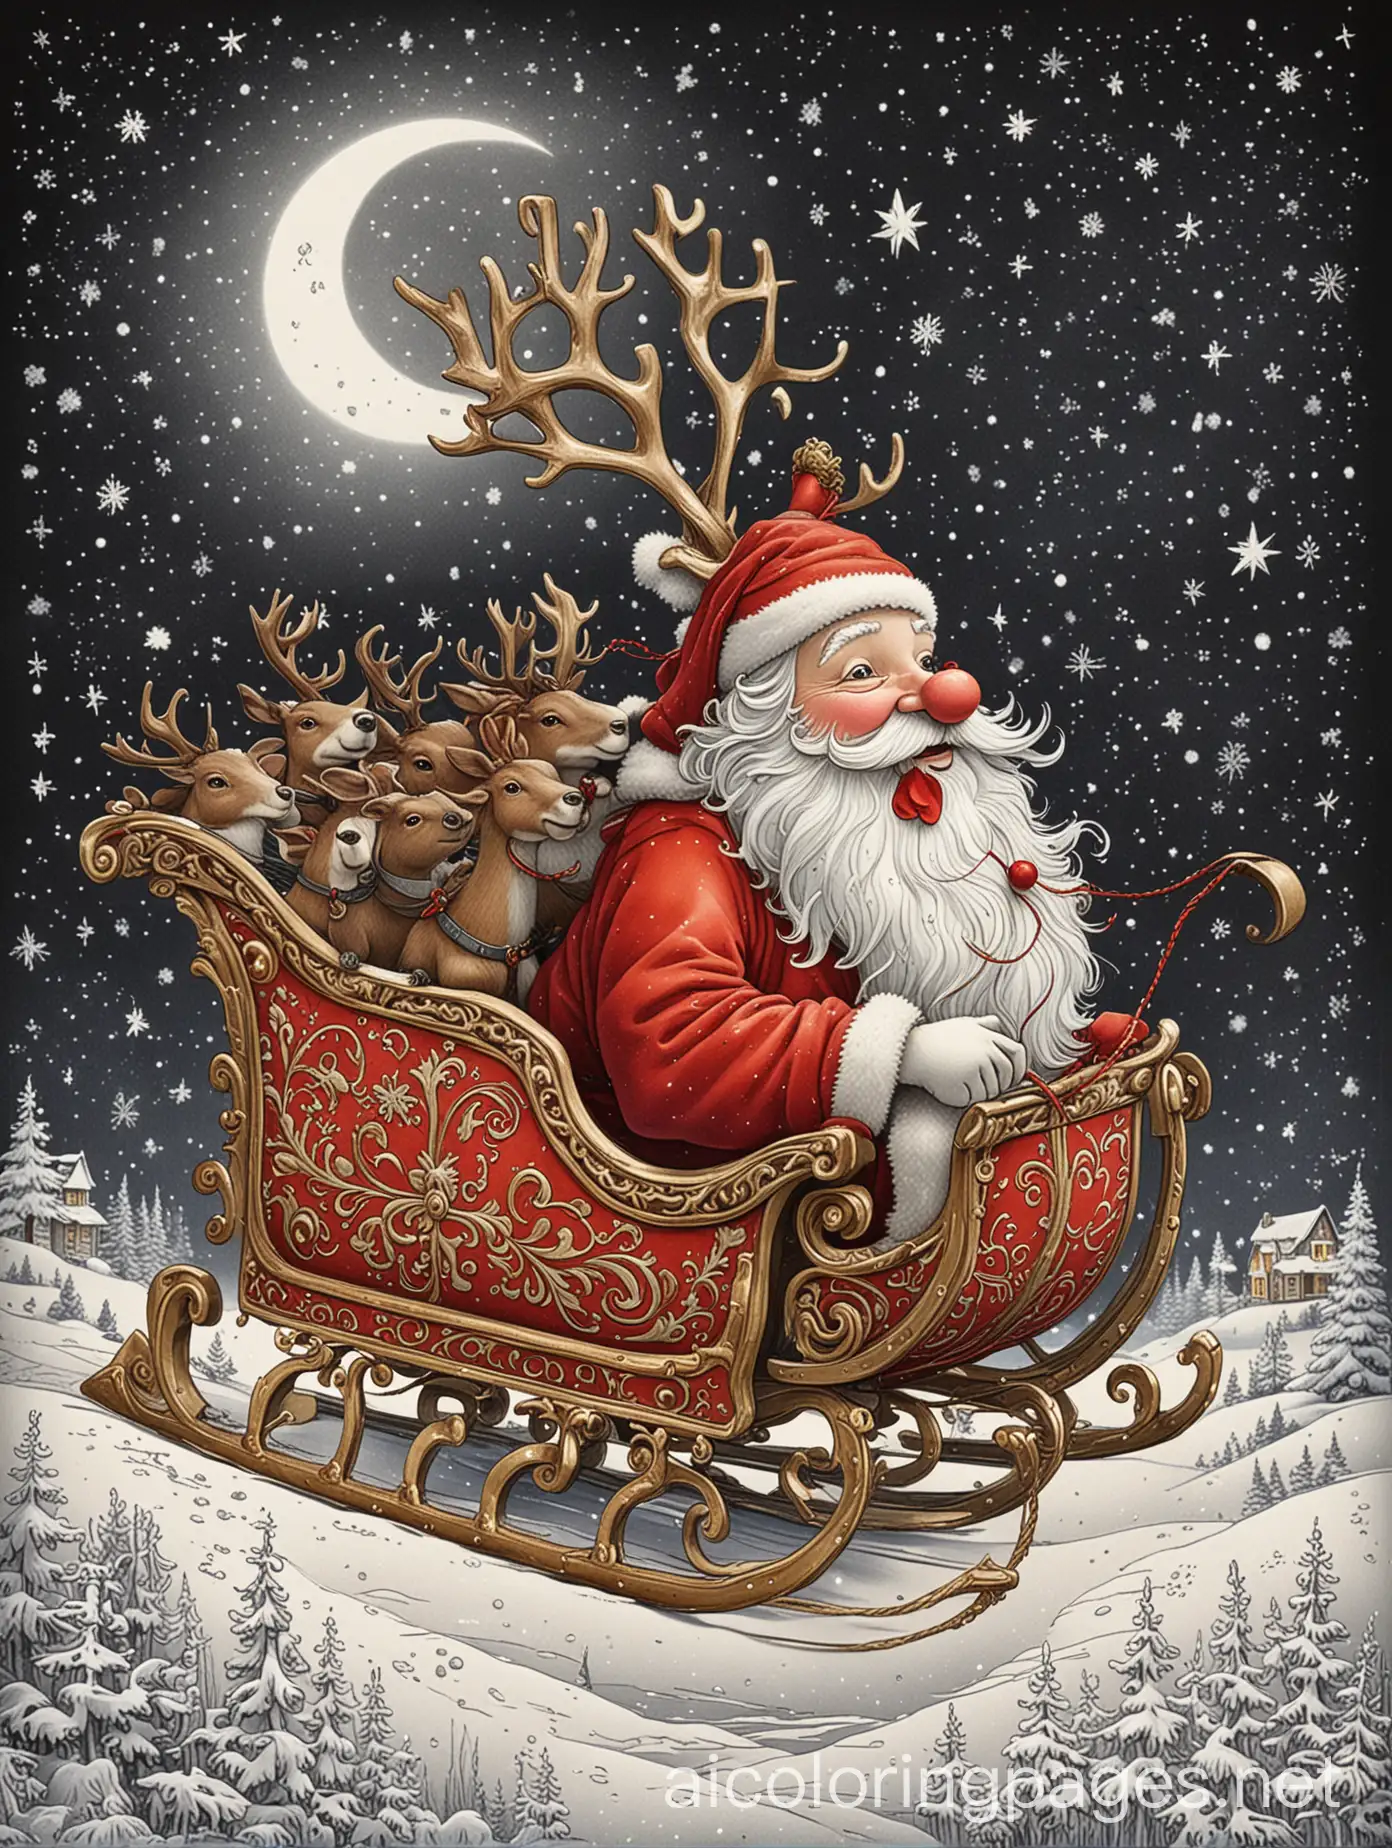 Jolly-Santa-Claus-Riding-Ornate-Sleigh-with-Eight-Reindeer-on-a-Starry-Snowy-Night